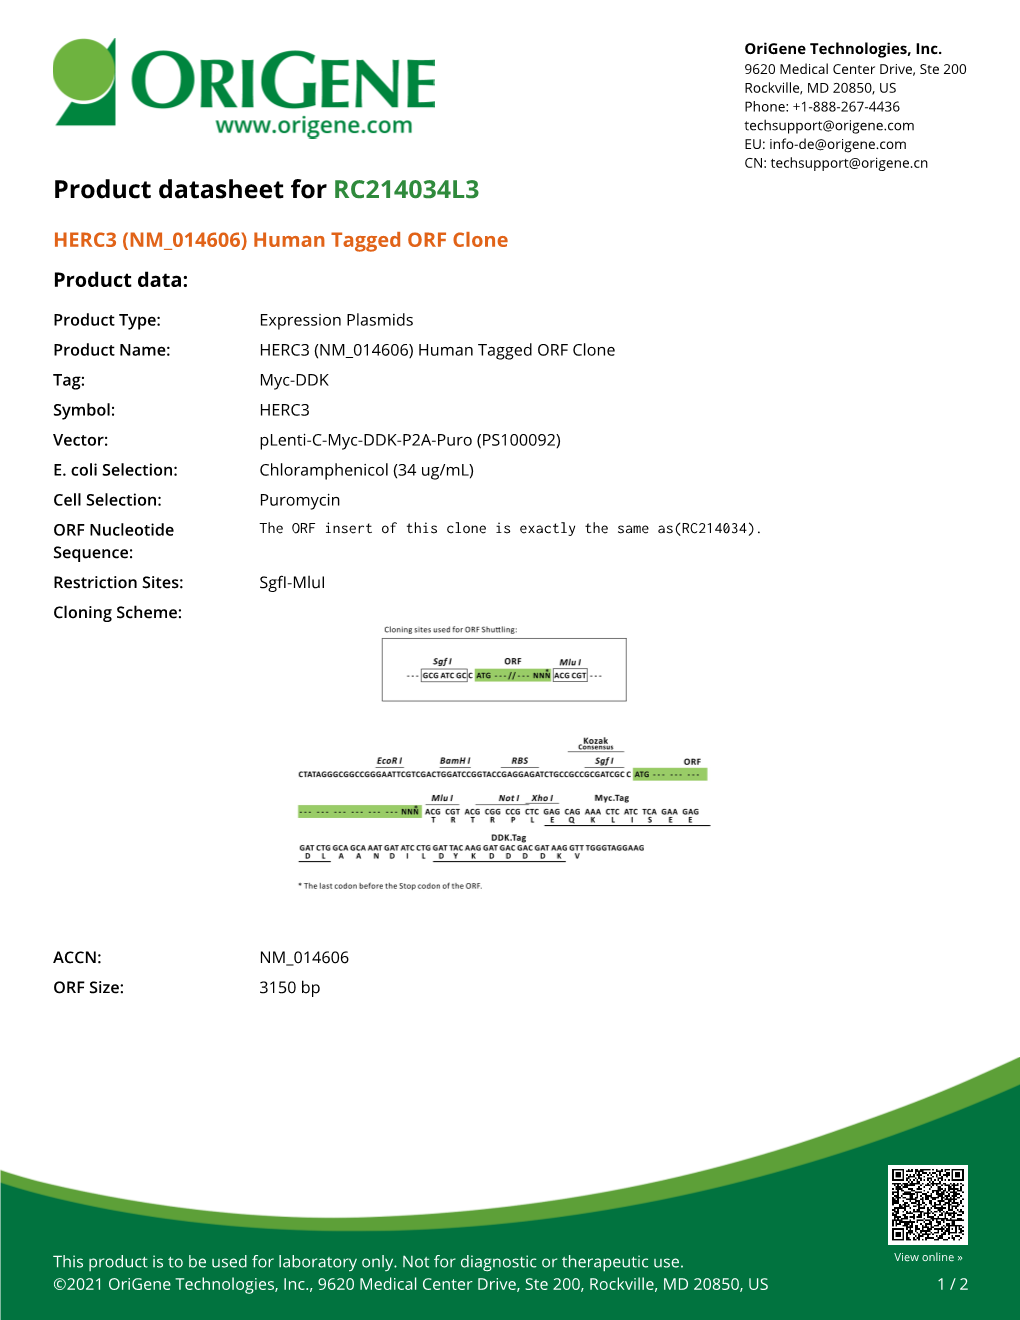 HERC3 (NM 014606) Human Tagged ORF Clone Product Data